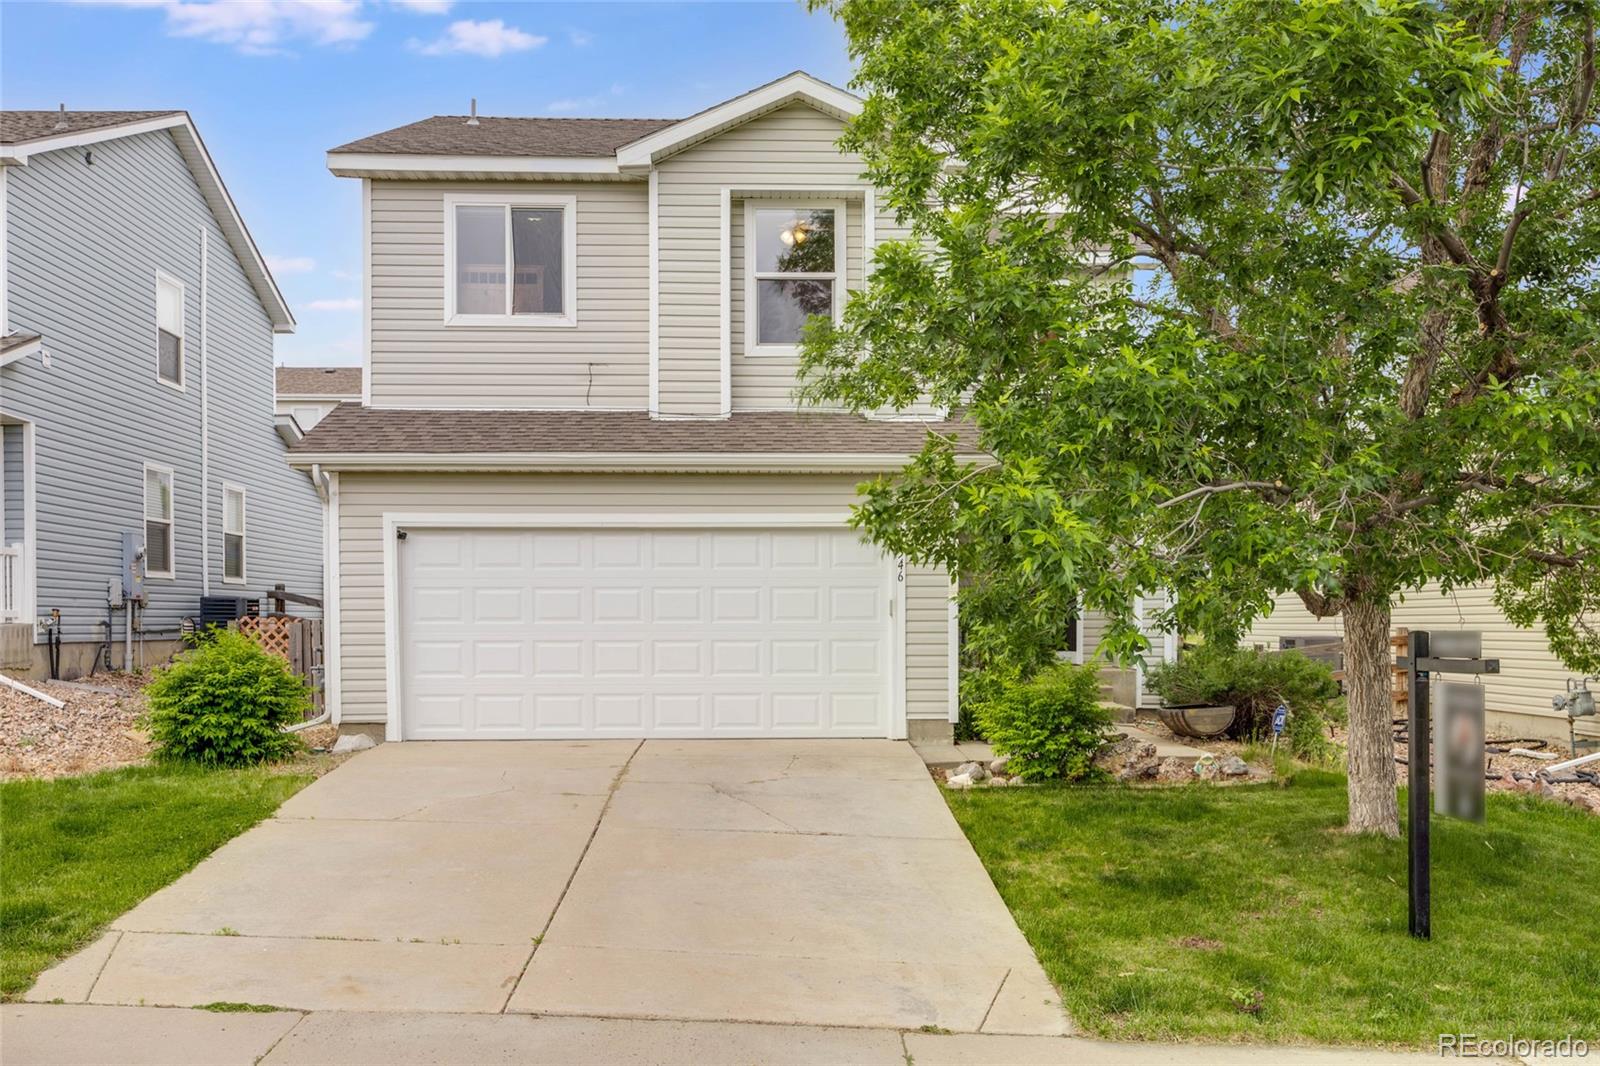 Report Image for 7546  Brown Bear Court,Littleton, Colorado